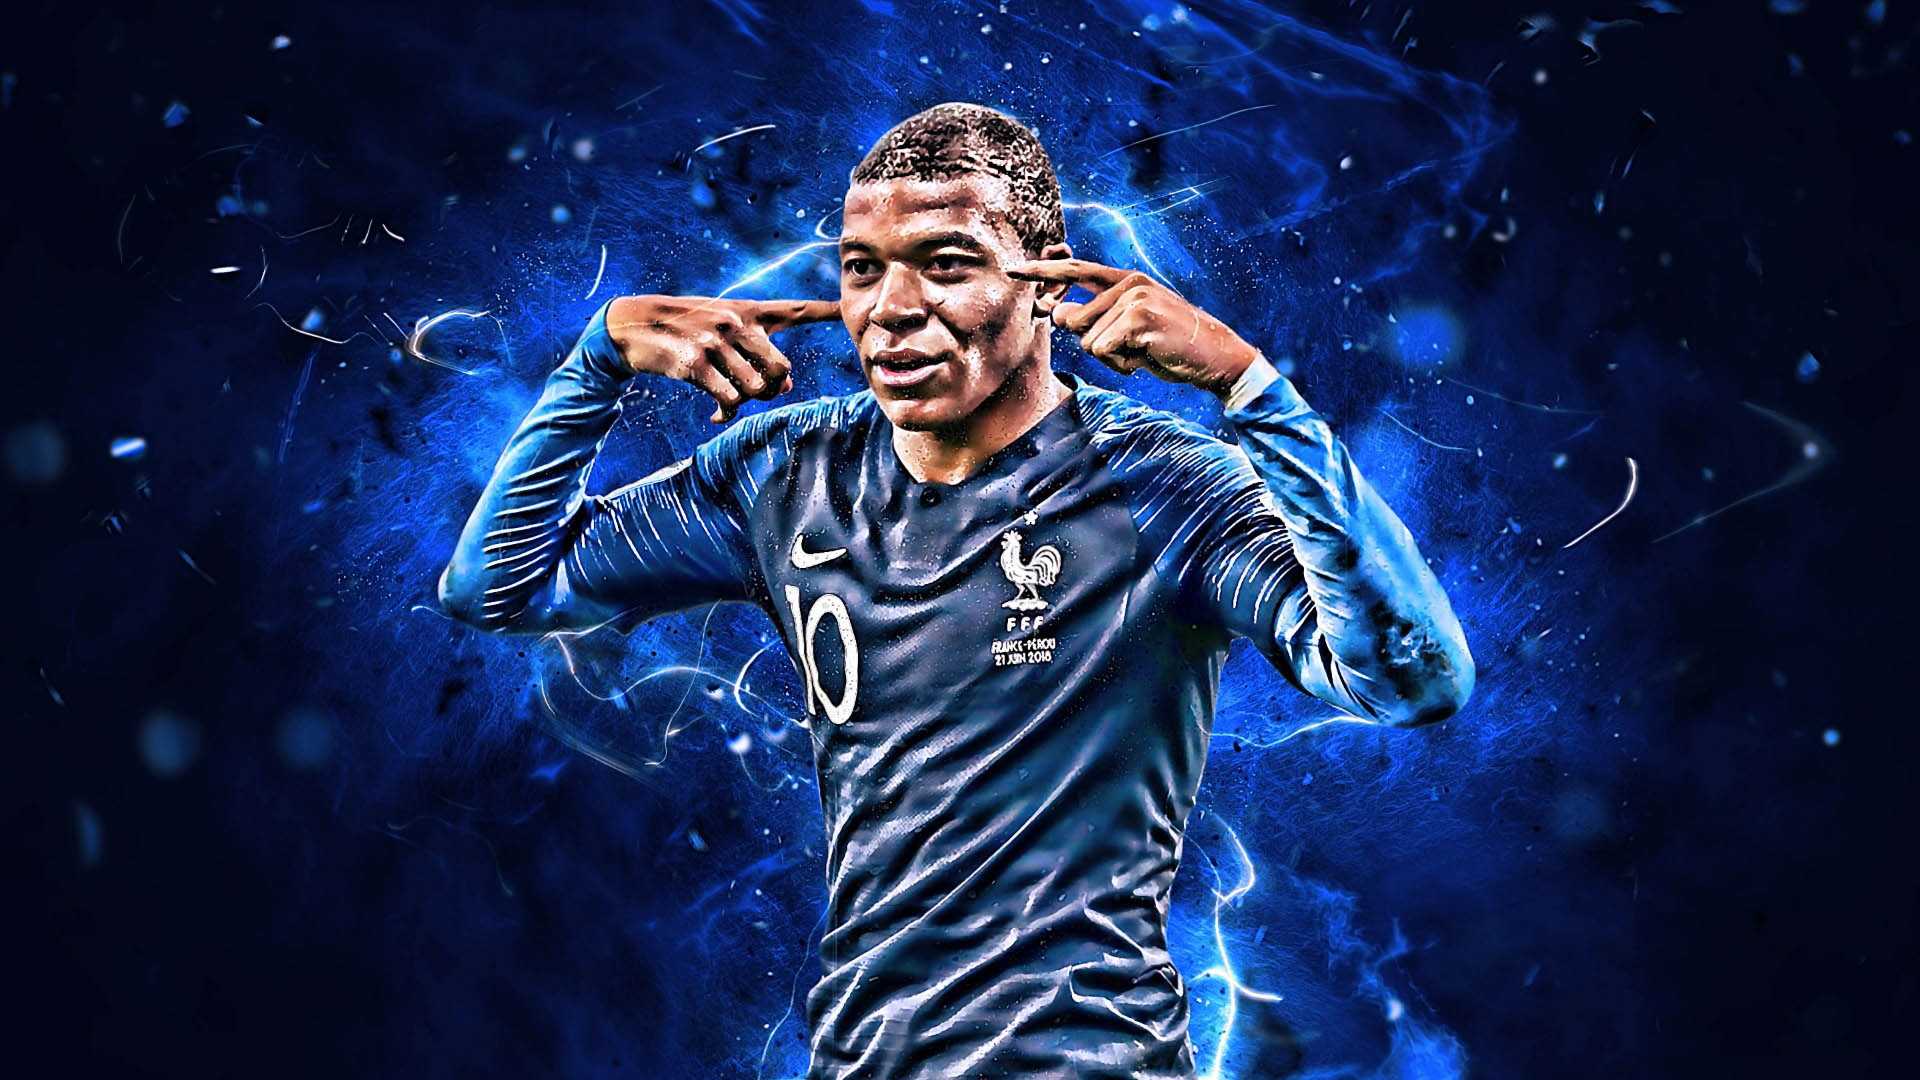 Kylian Mbappe Poster 41Football poster canvas material wallpaper mural  suitable for office living room bedroom20x30inch50x75cm  Amazoncouk  Home  Kitchen